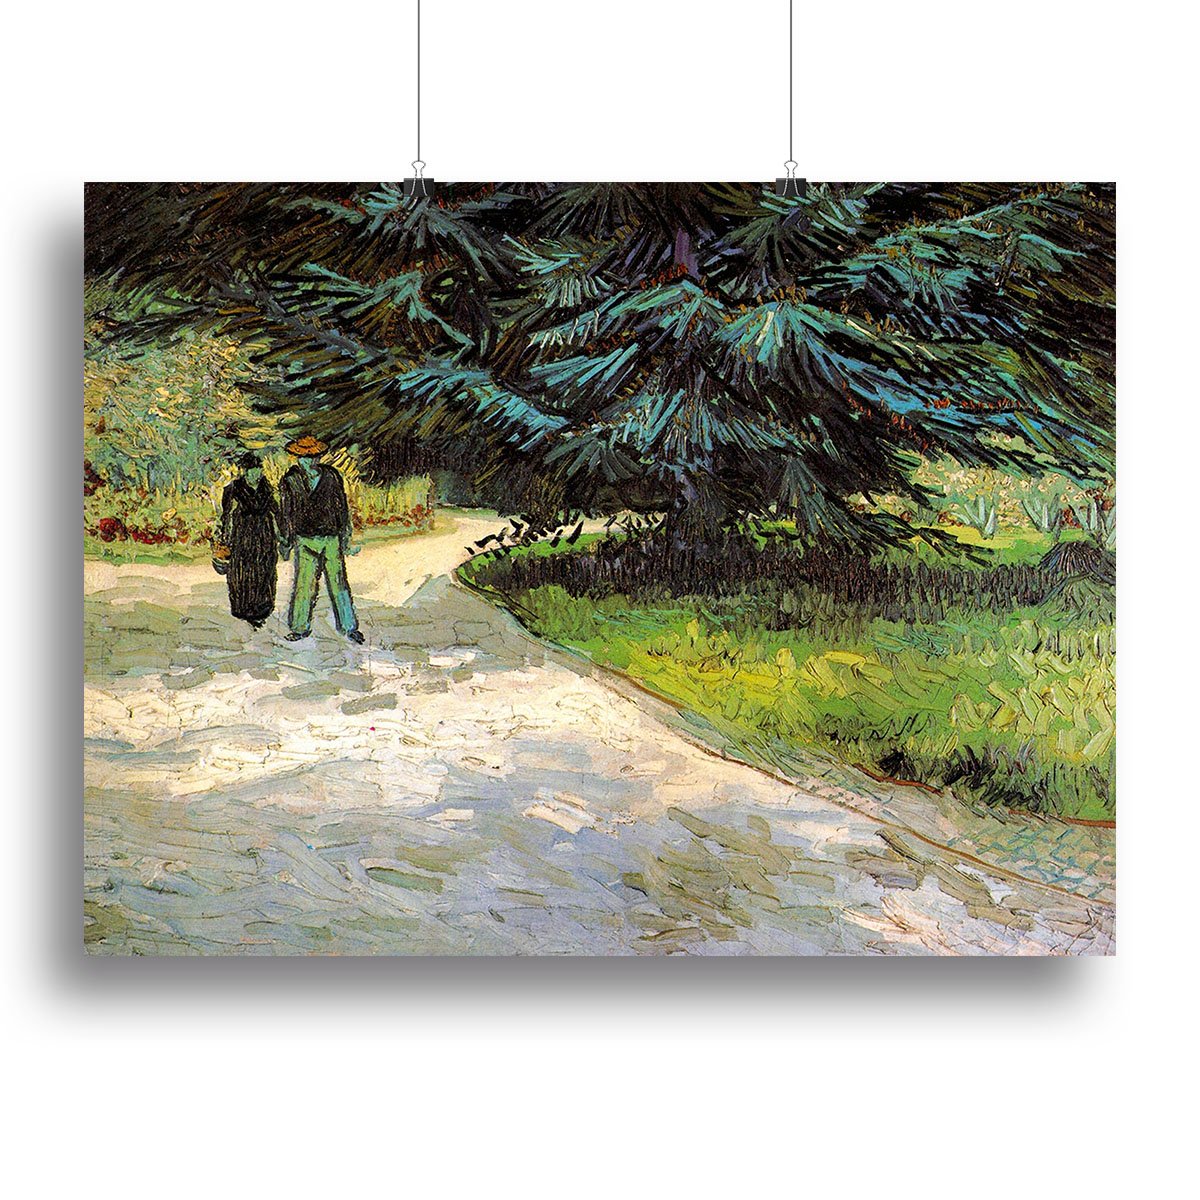 Public Garden with Couple and Blue Fir Tree The Poet s Garden III by Van Gogh Canvas Print or Poster